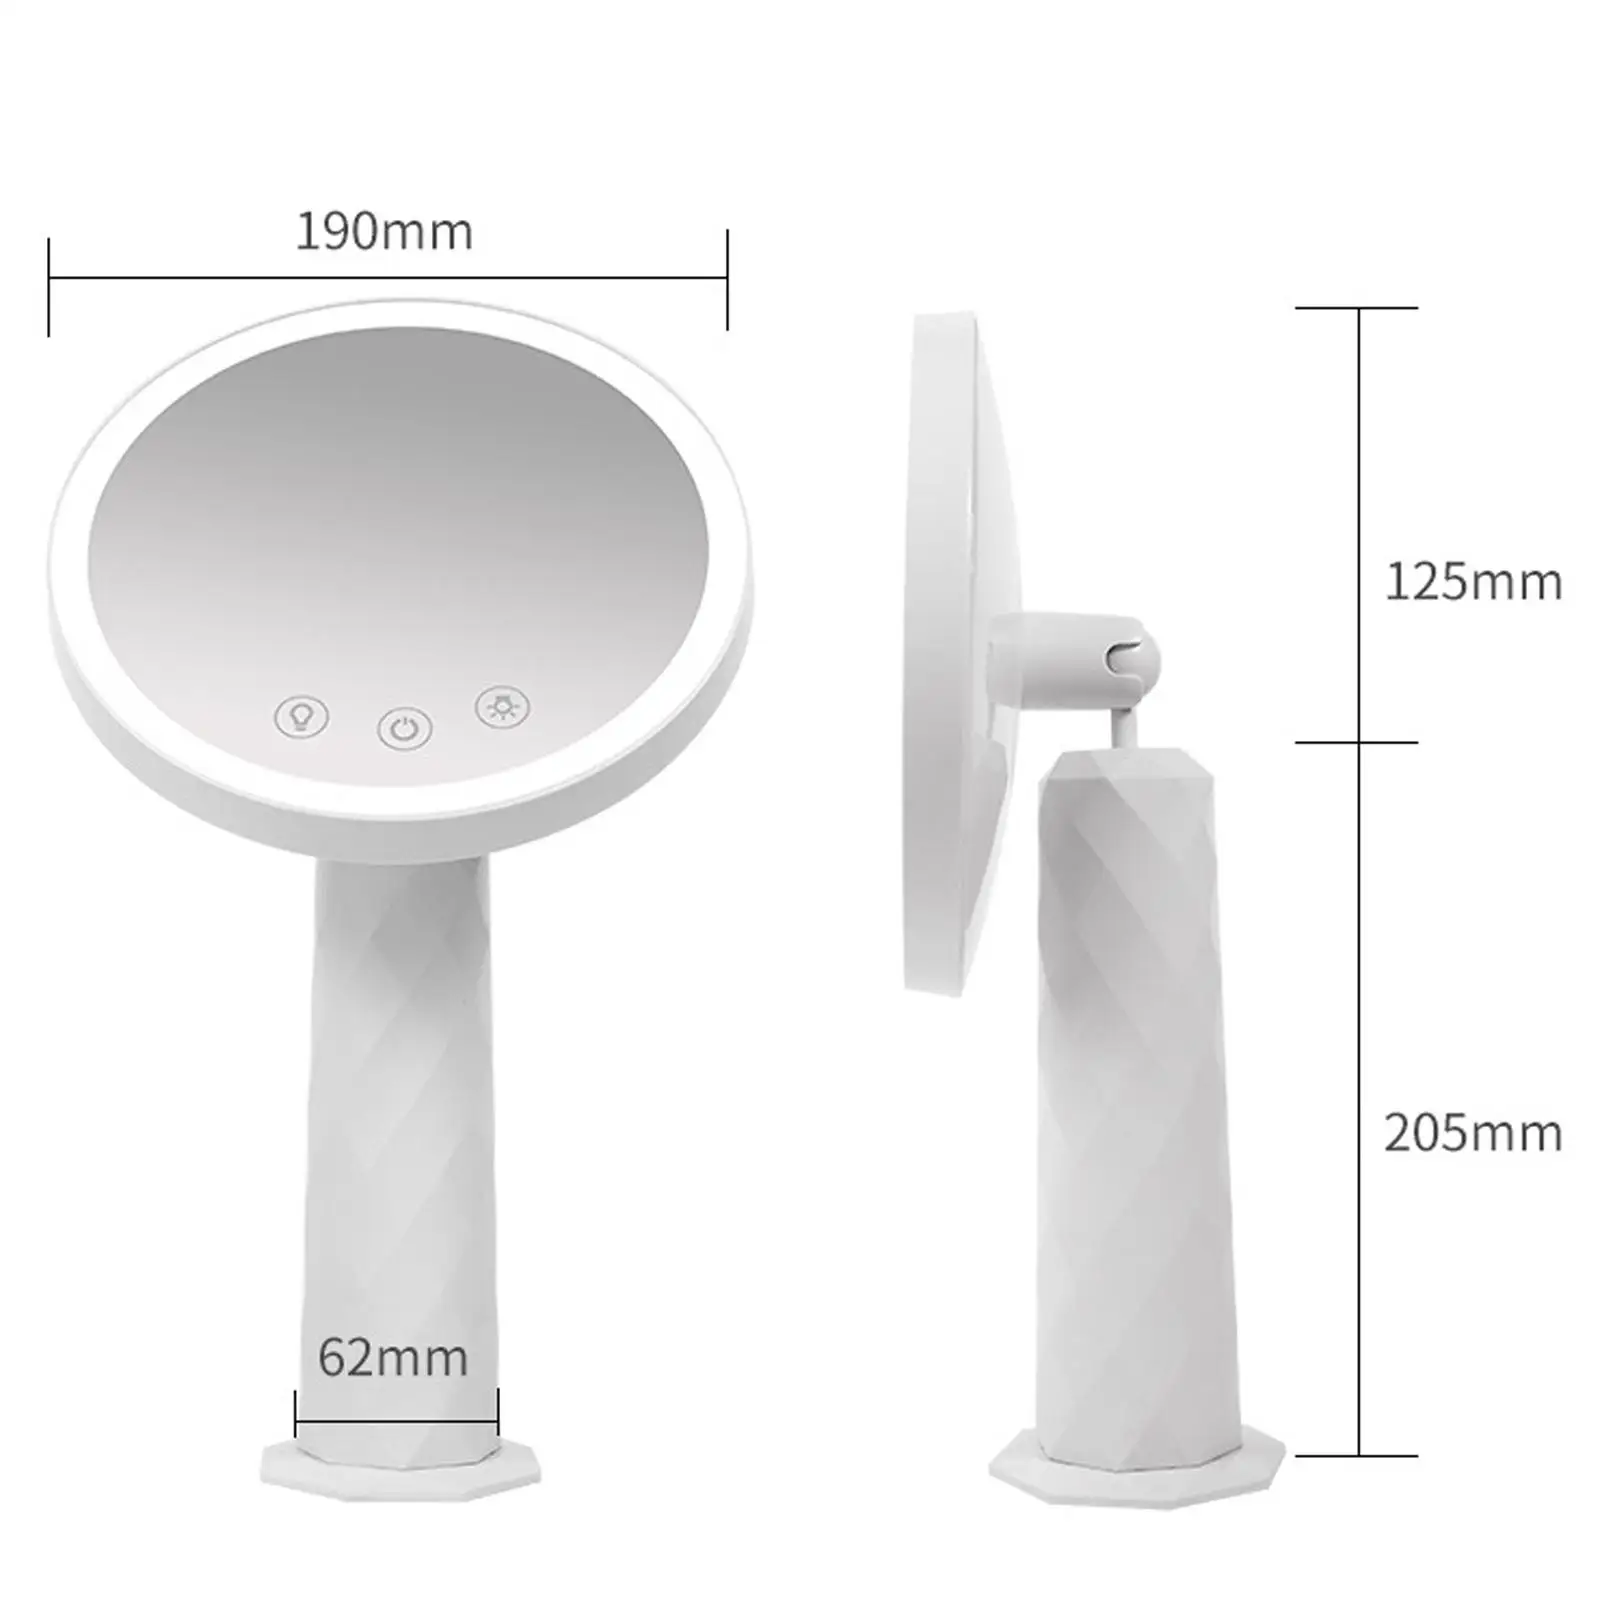 Cosmetic Light up Mirror Rechargeable 360 Rotation Tabletop Lamp Vanity Mirror for Travelling Home Dormitory Girl Gift Bathroom